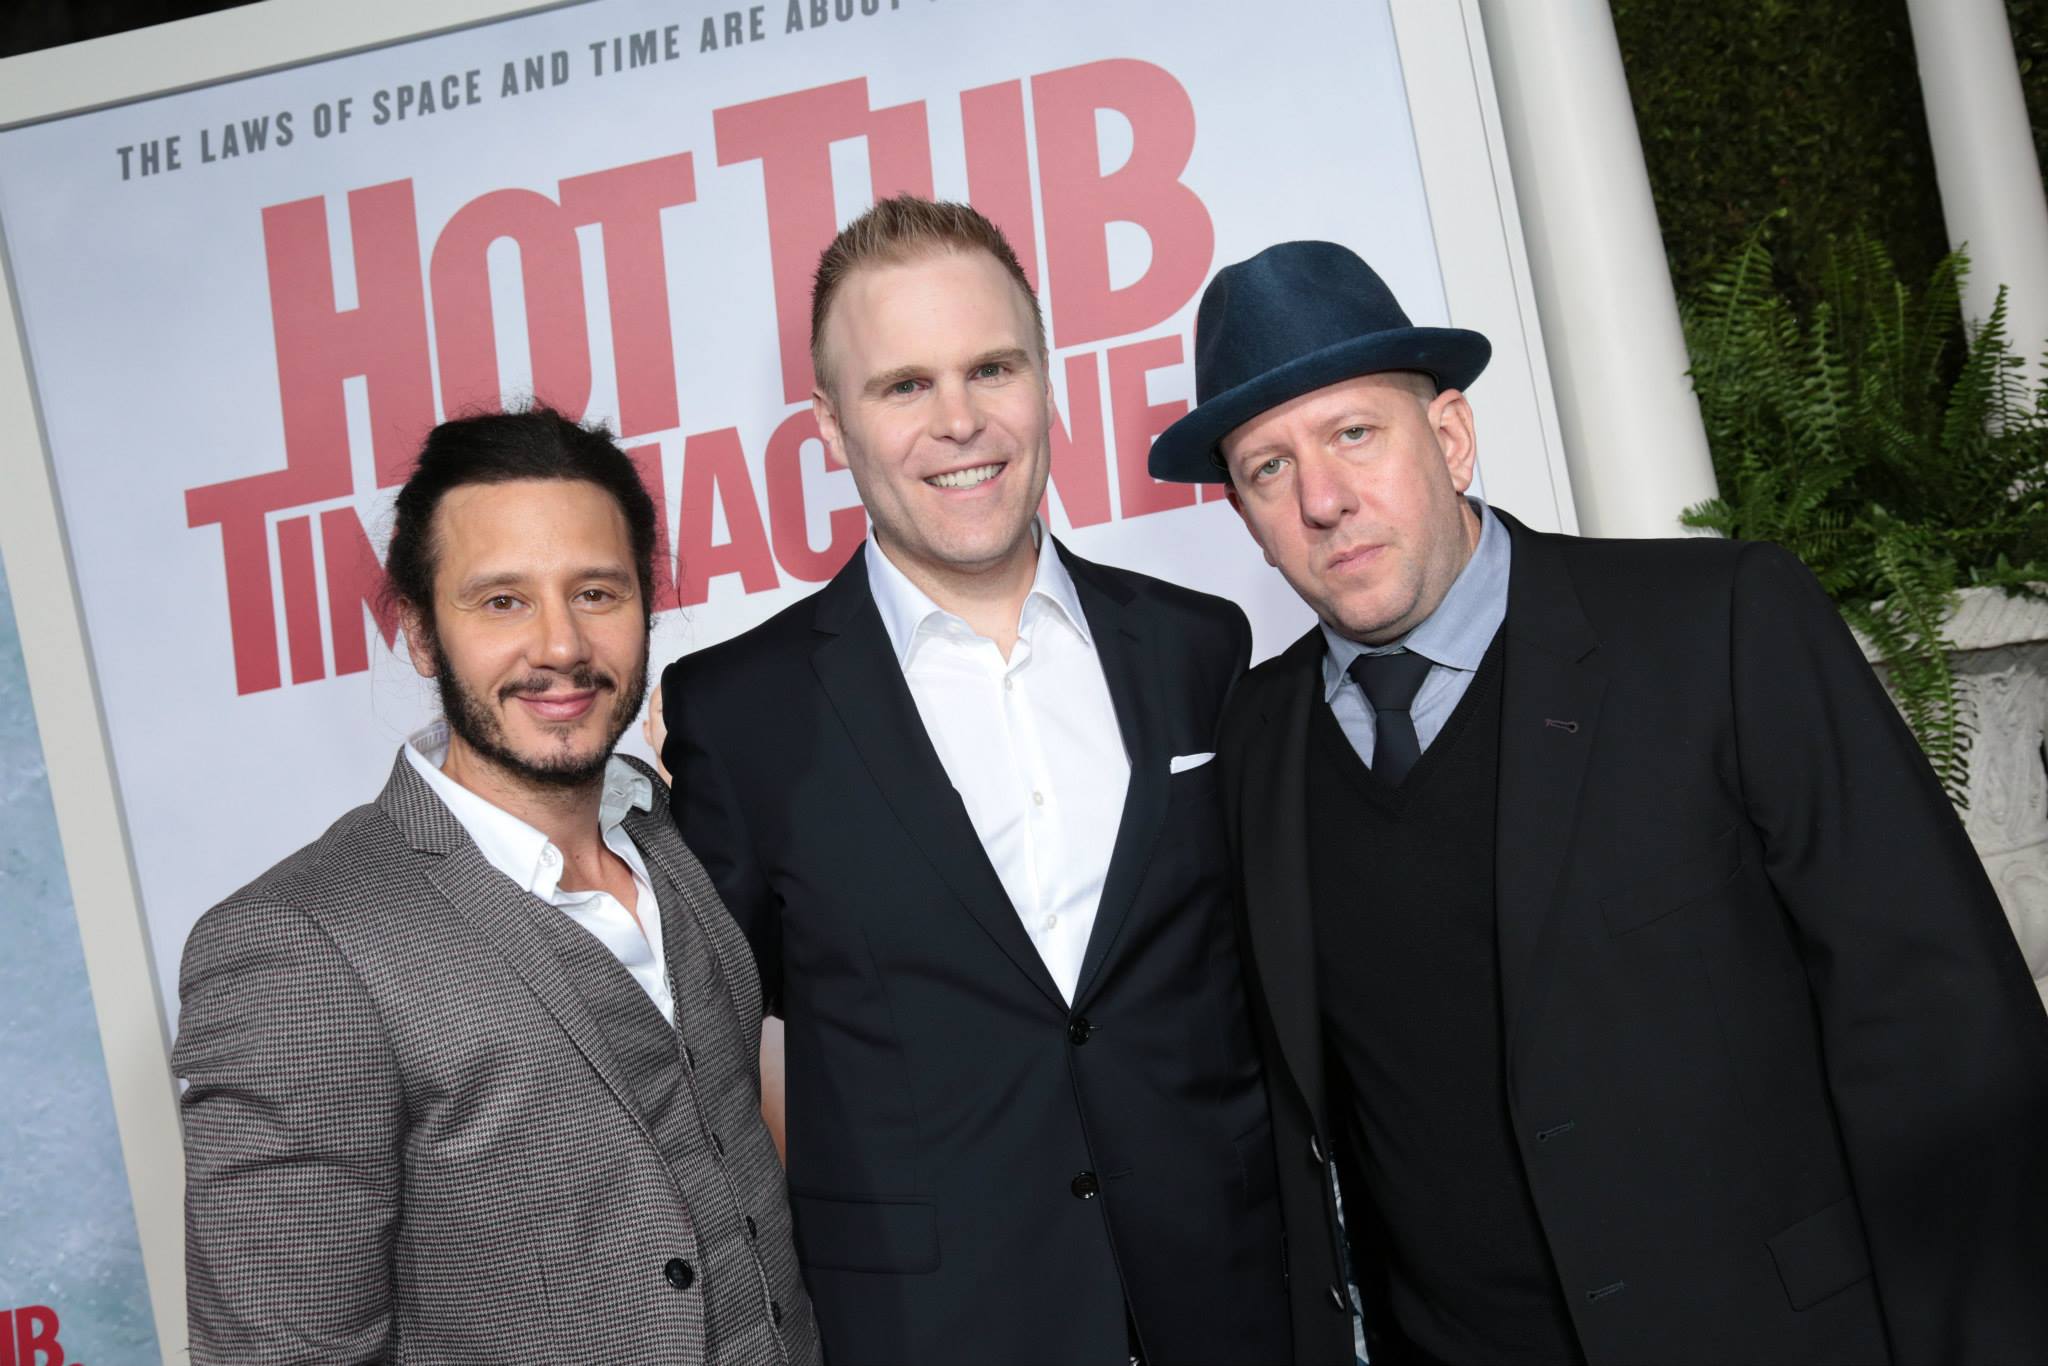 Andrew Panay, Josh Heald, & Steve Pink at Hot Tub Time Machine 2 premiere - February 18, 2015